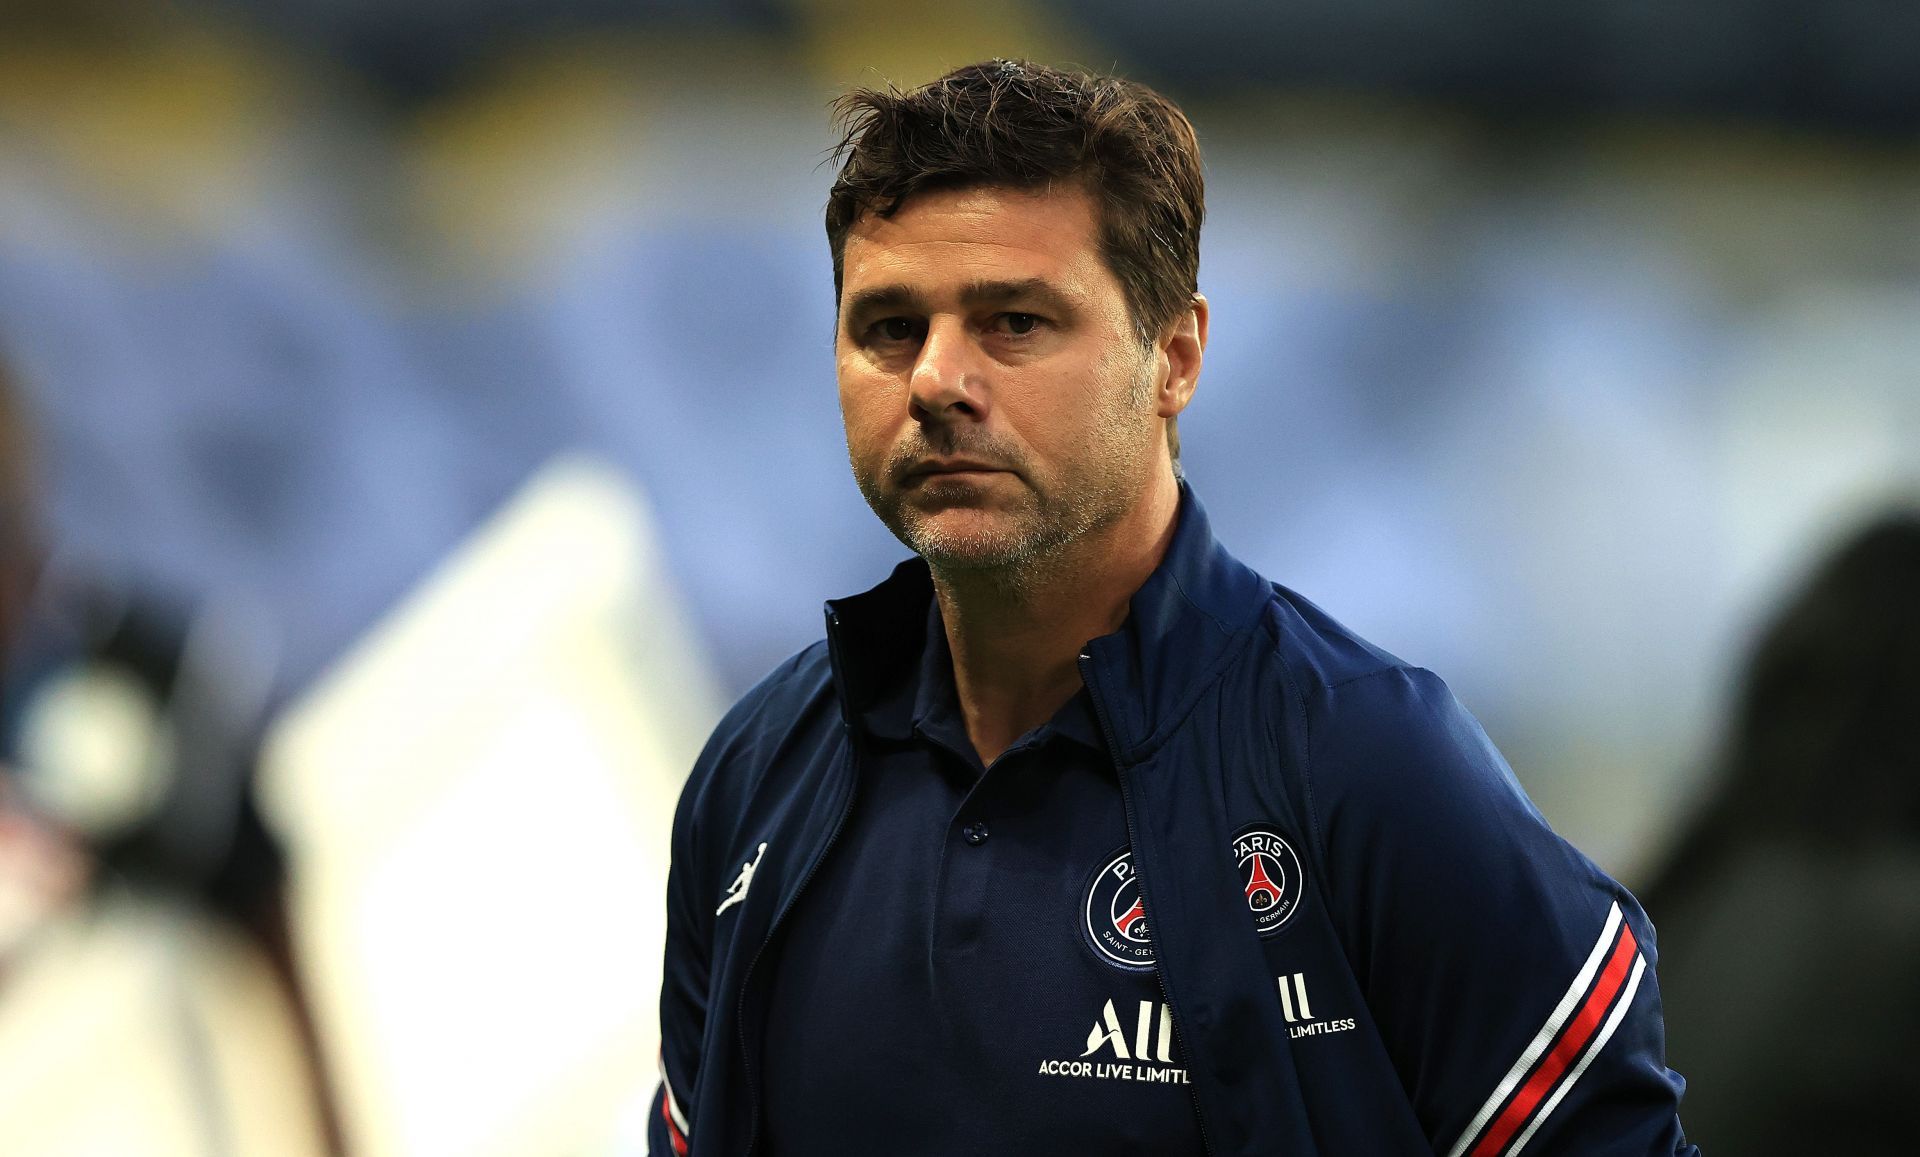 Mauricio Pochettino has brushed aside rumours linking him to an exit from PSG.